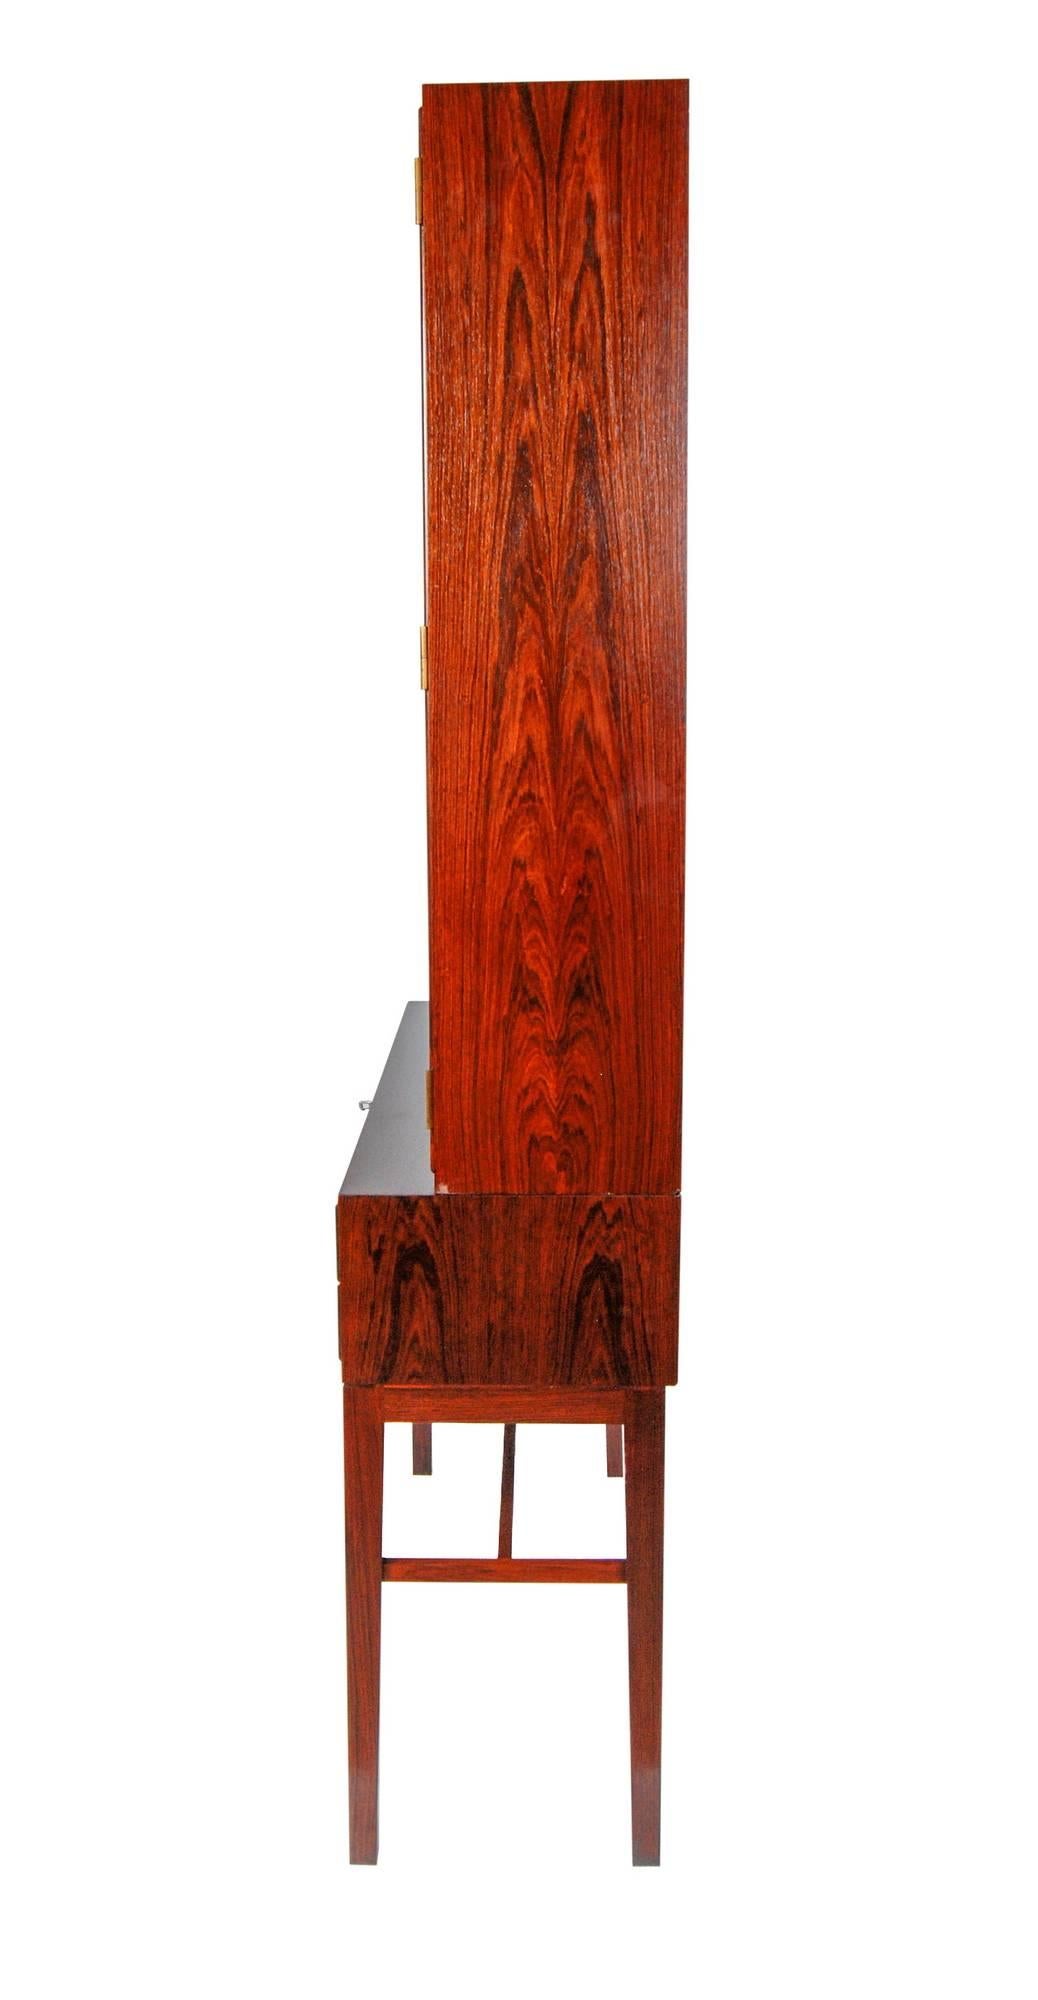 Rare vintage Danish rosewood two-piece glass front cabinet designed by Svend Langkilde for Illums Bolighus, 1960s. The base has five drawers that are all rosewood constructed including the dovetails, all the locks are functional and the key is